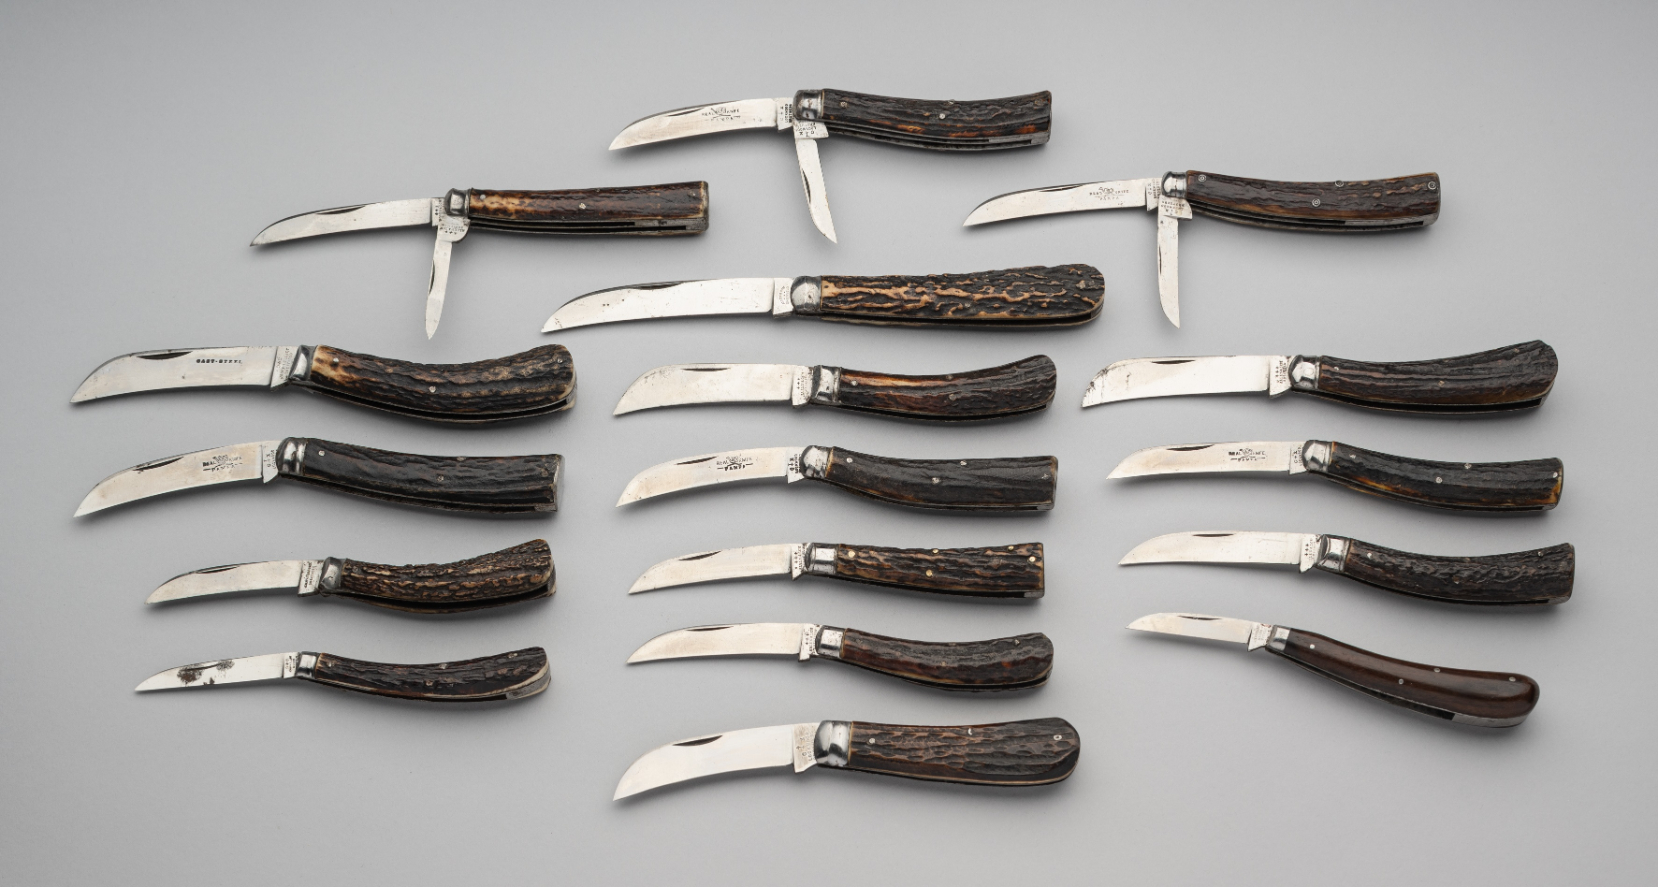 FIVE PRUNING KNIVES, LOCKWOOD BROTHERS, SHEFFIELD, AND NINETEEN FURTHER PRUNING KNIVES, LATE - Image 2 of 2